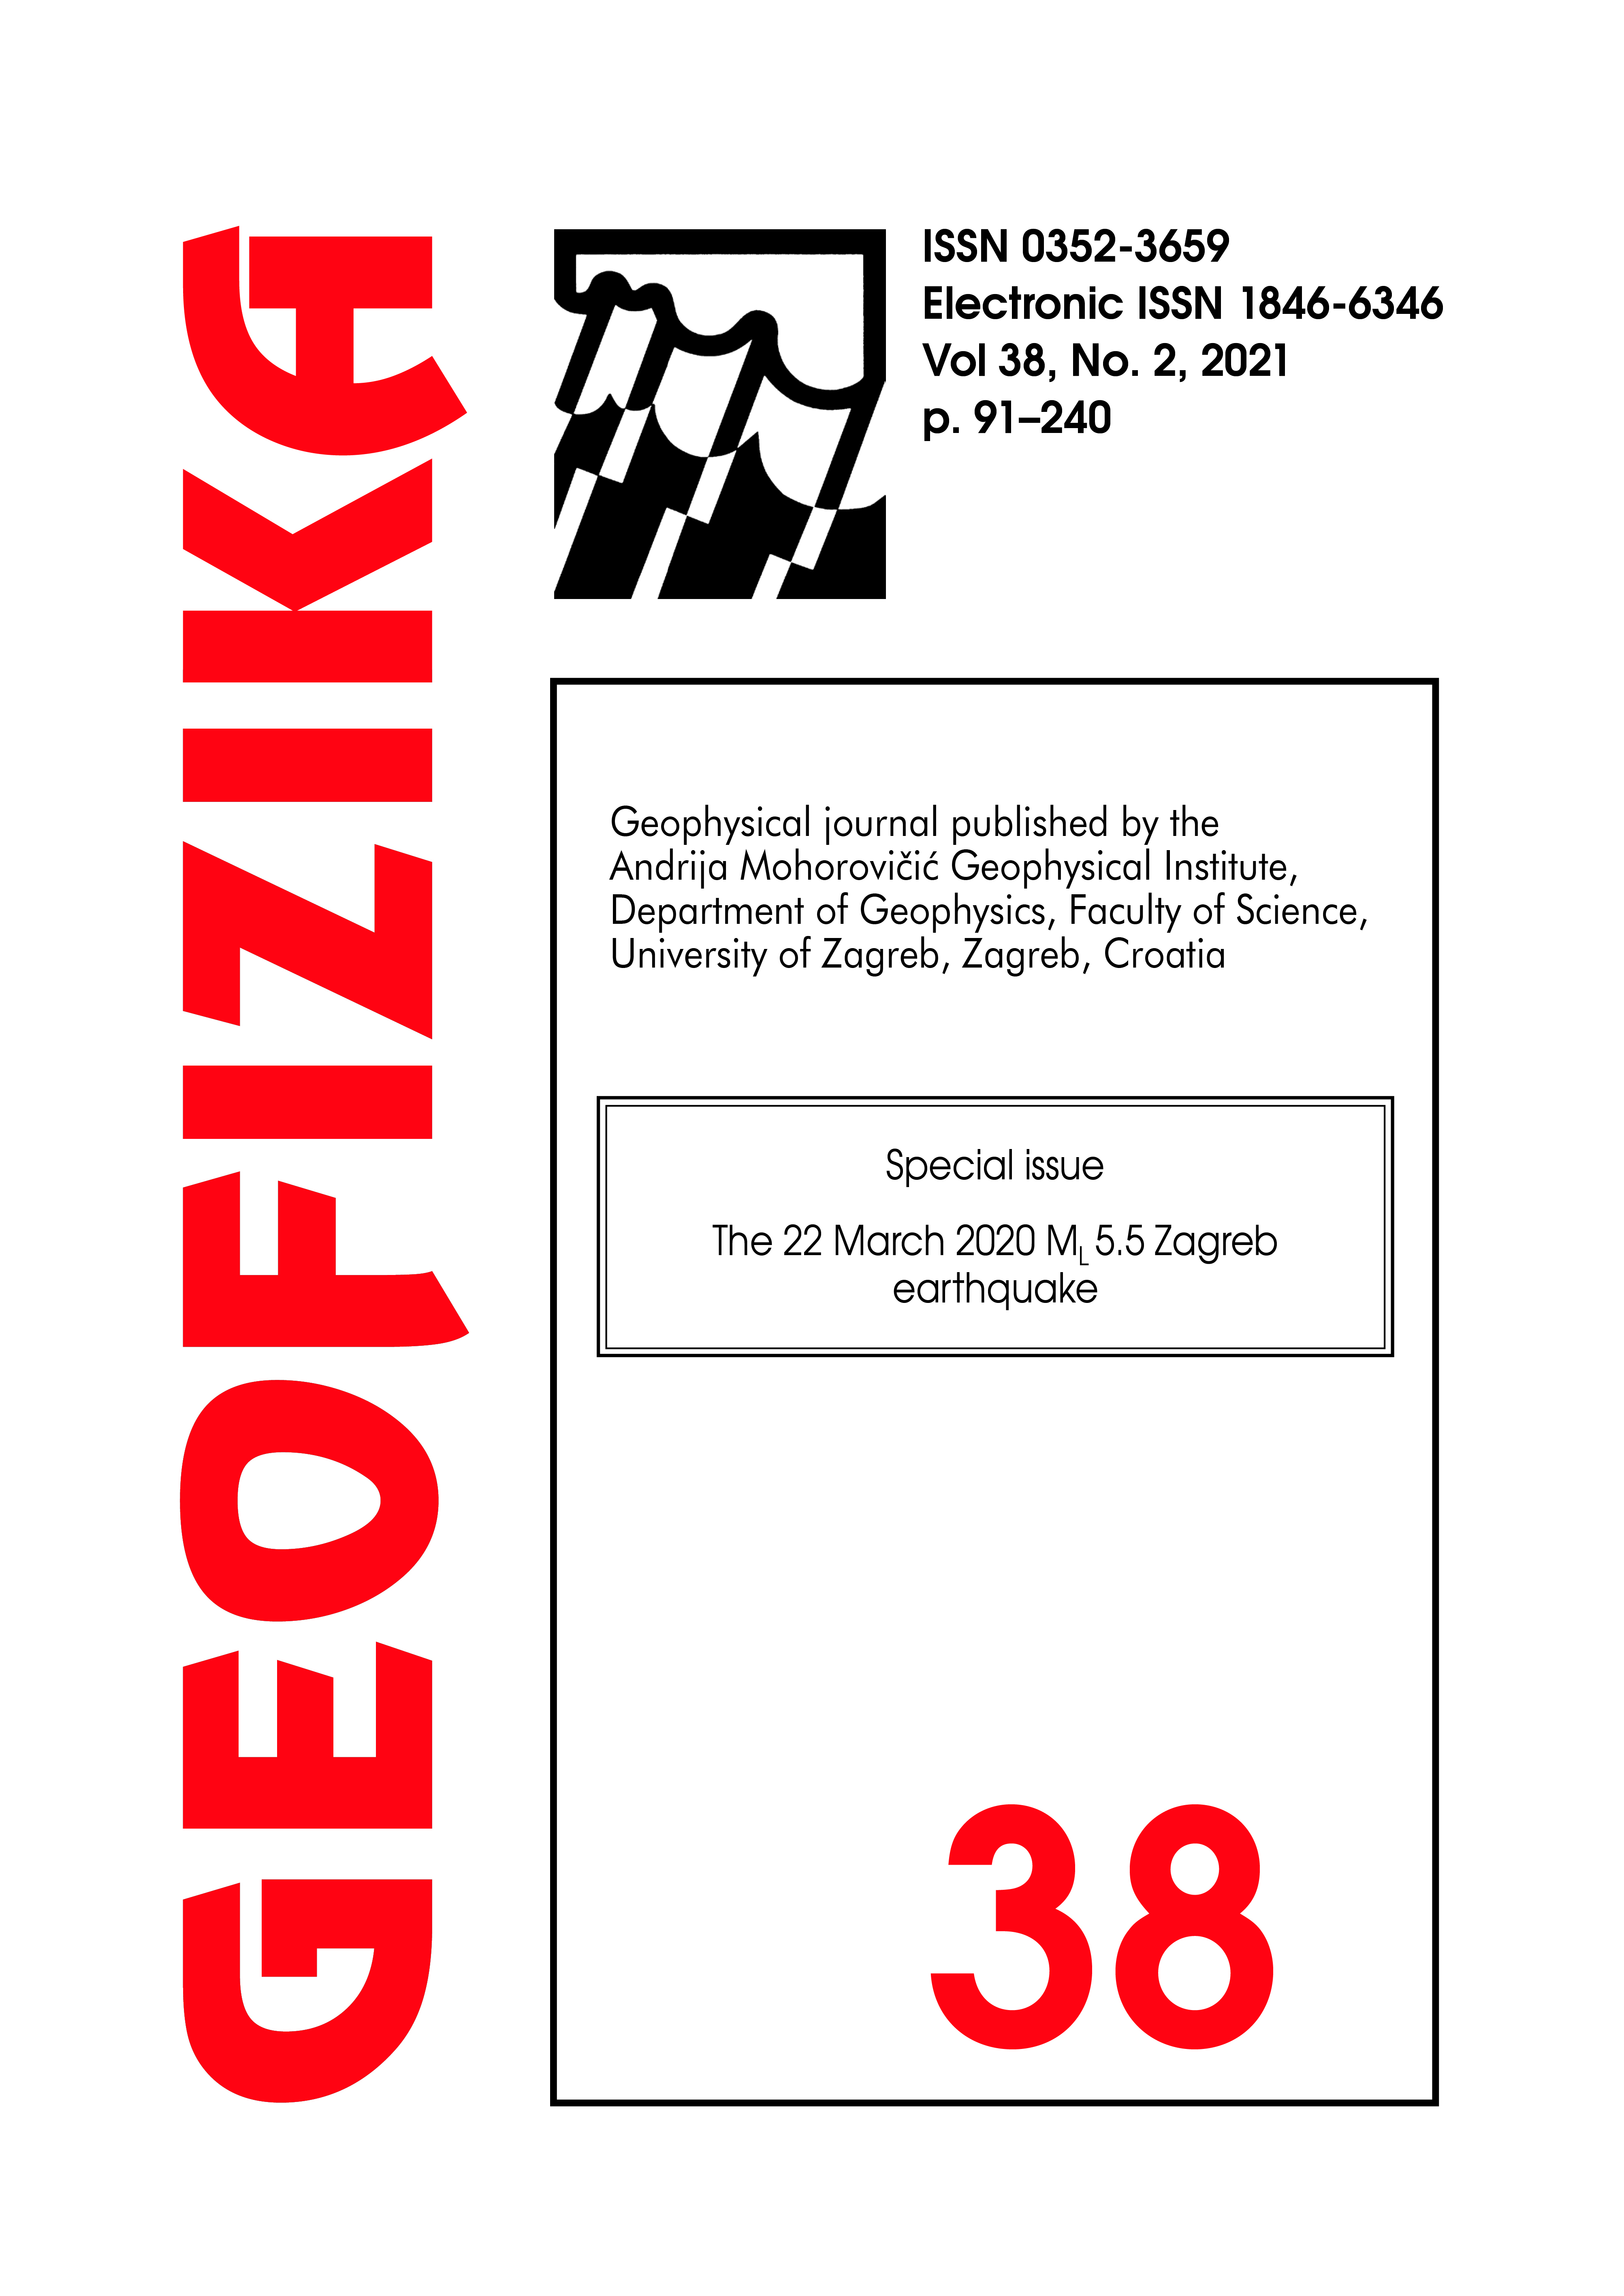 					View Vol. 38 No. 2 (2021): Special issue "The 22 March 2020 ML 5.5 Zagreb earthquake"
				